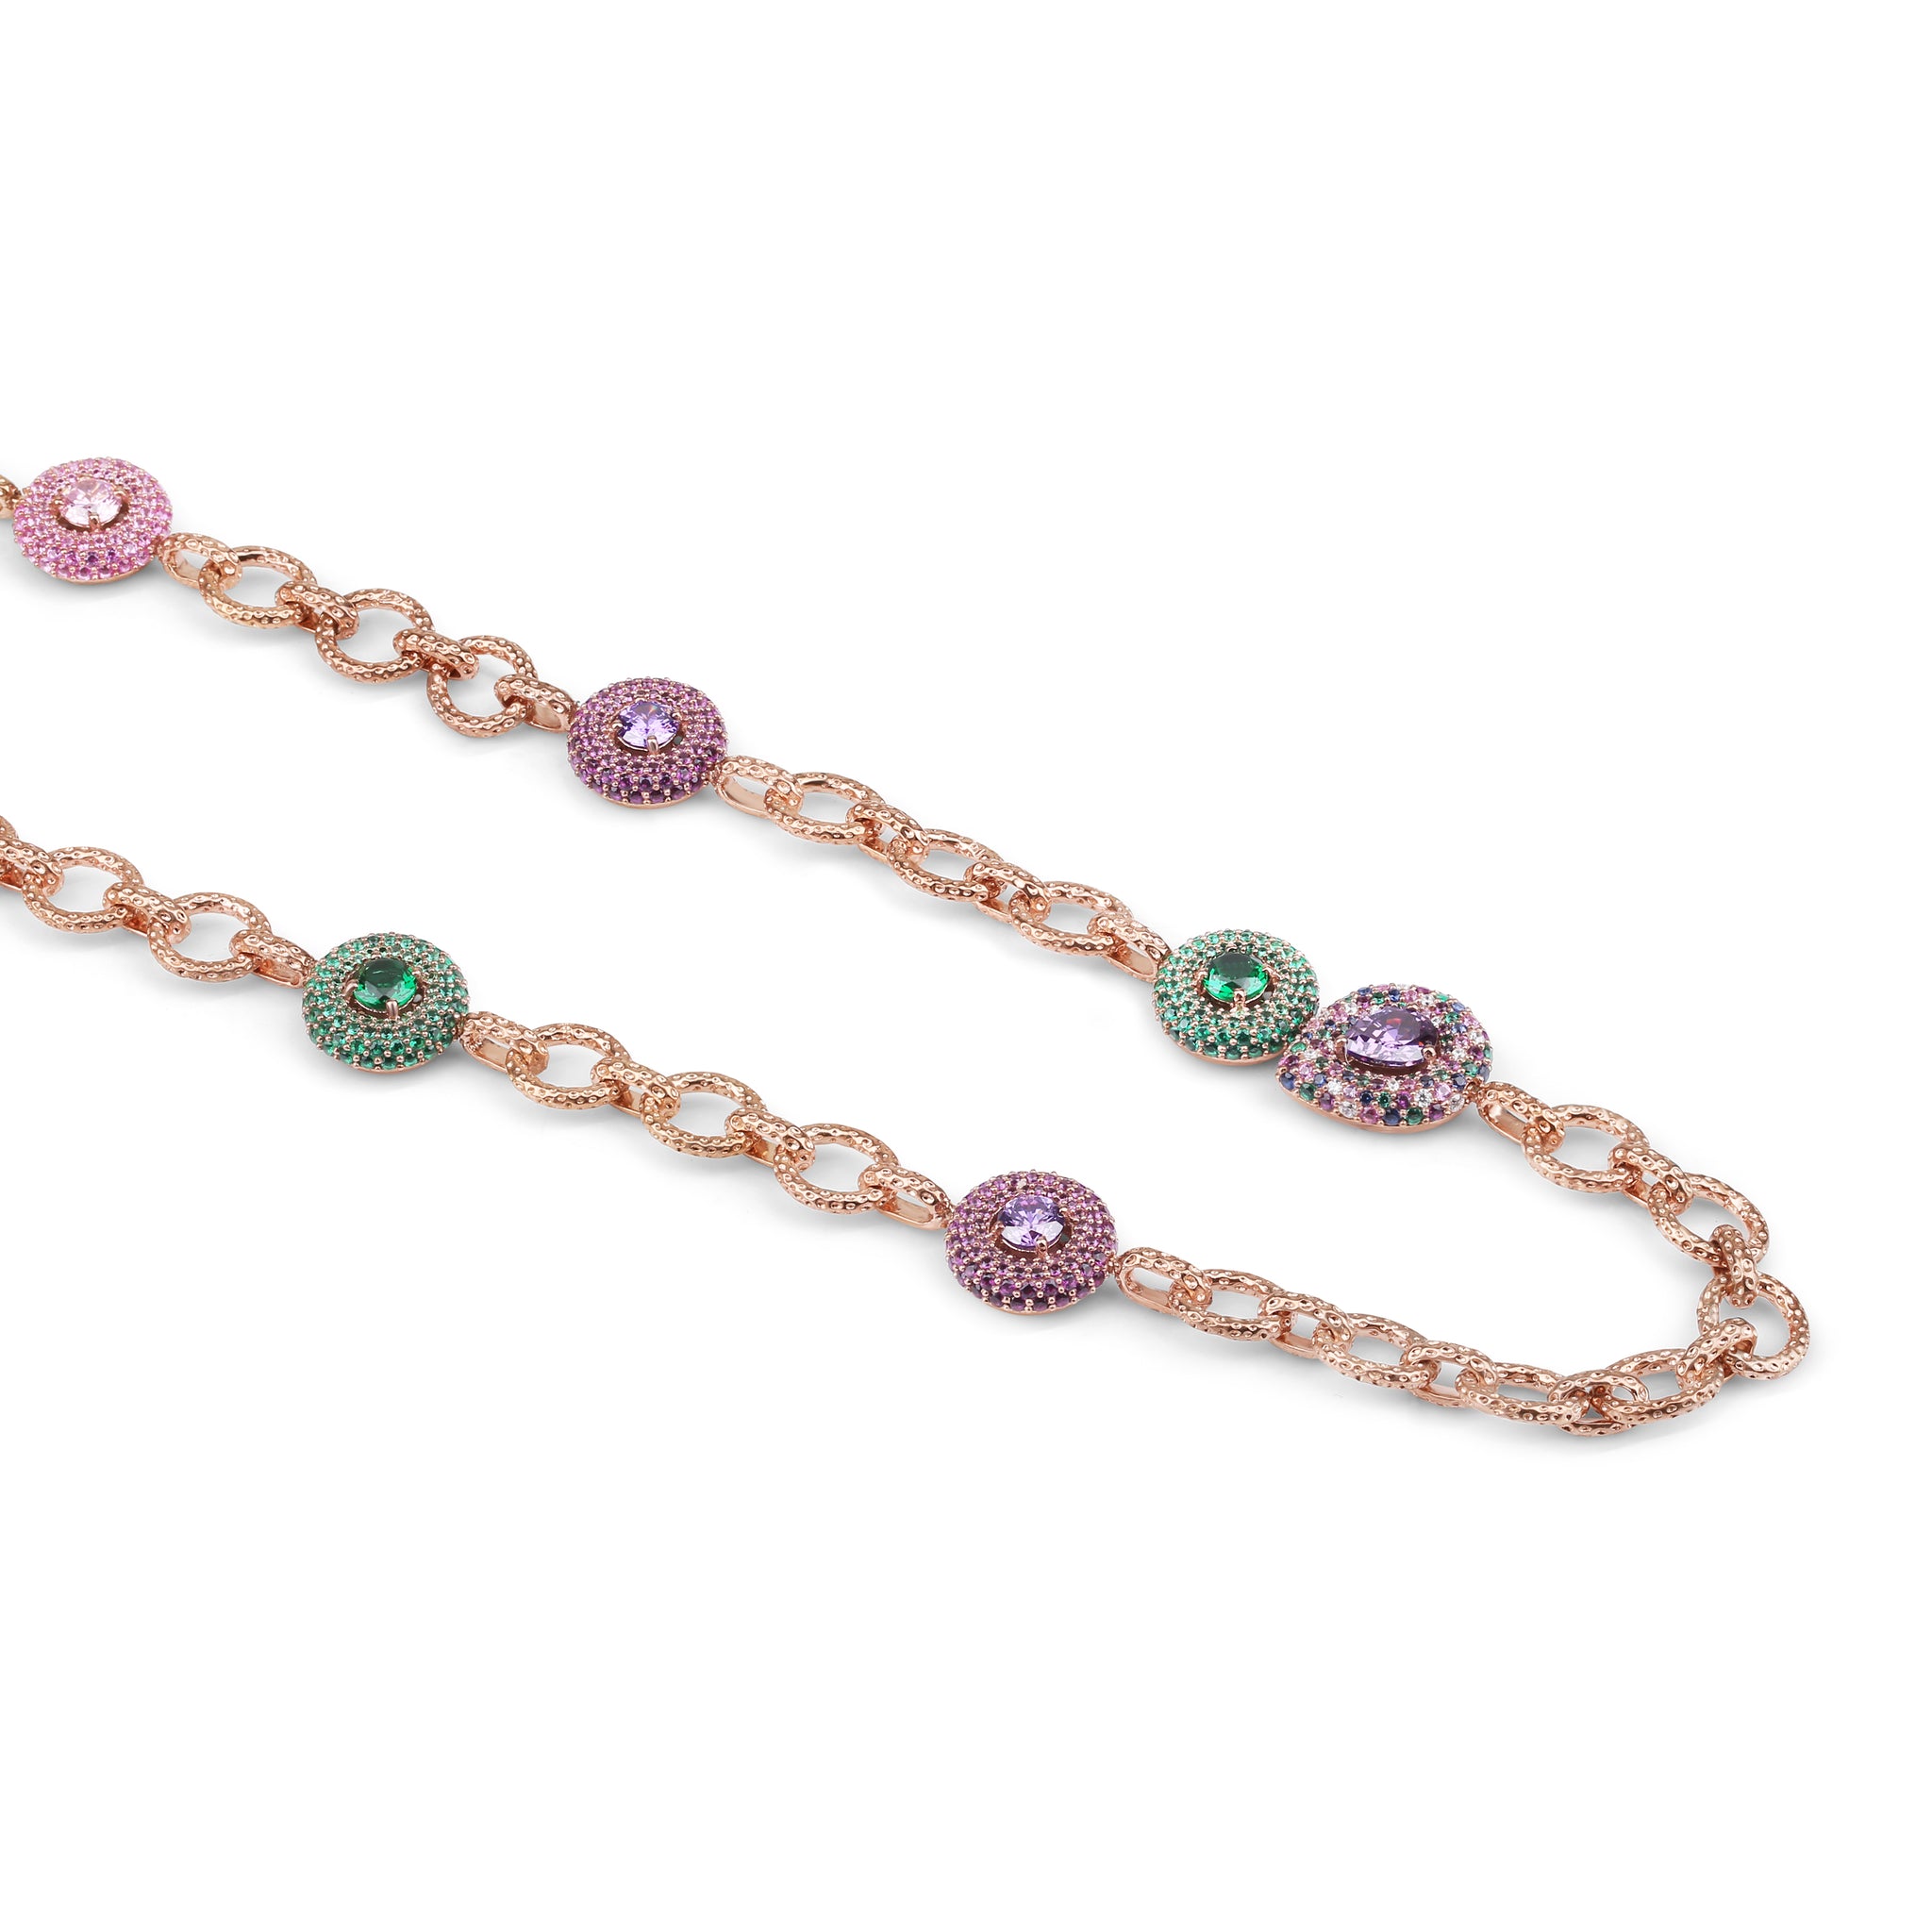 Queen's String Necklace - Rose Gold